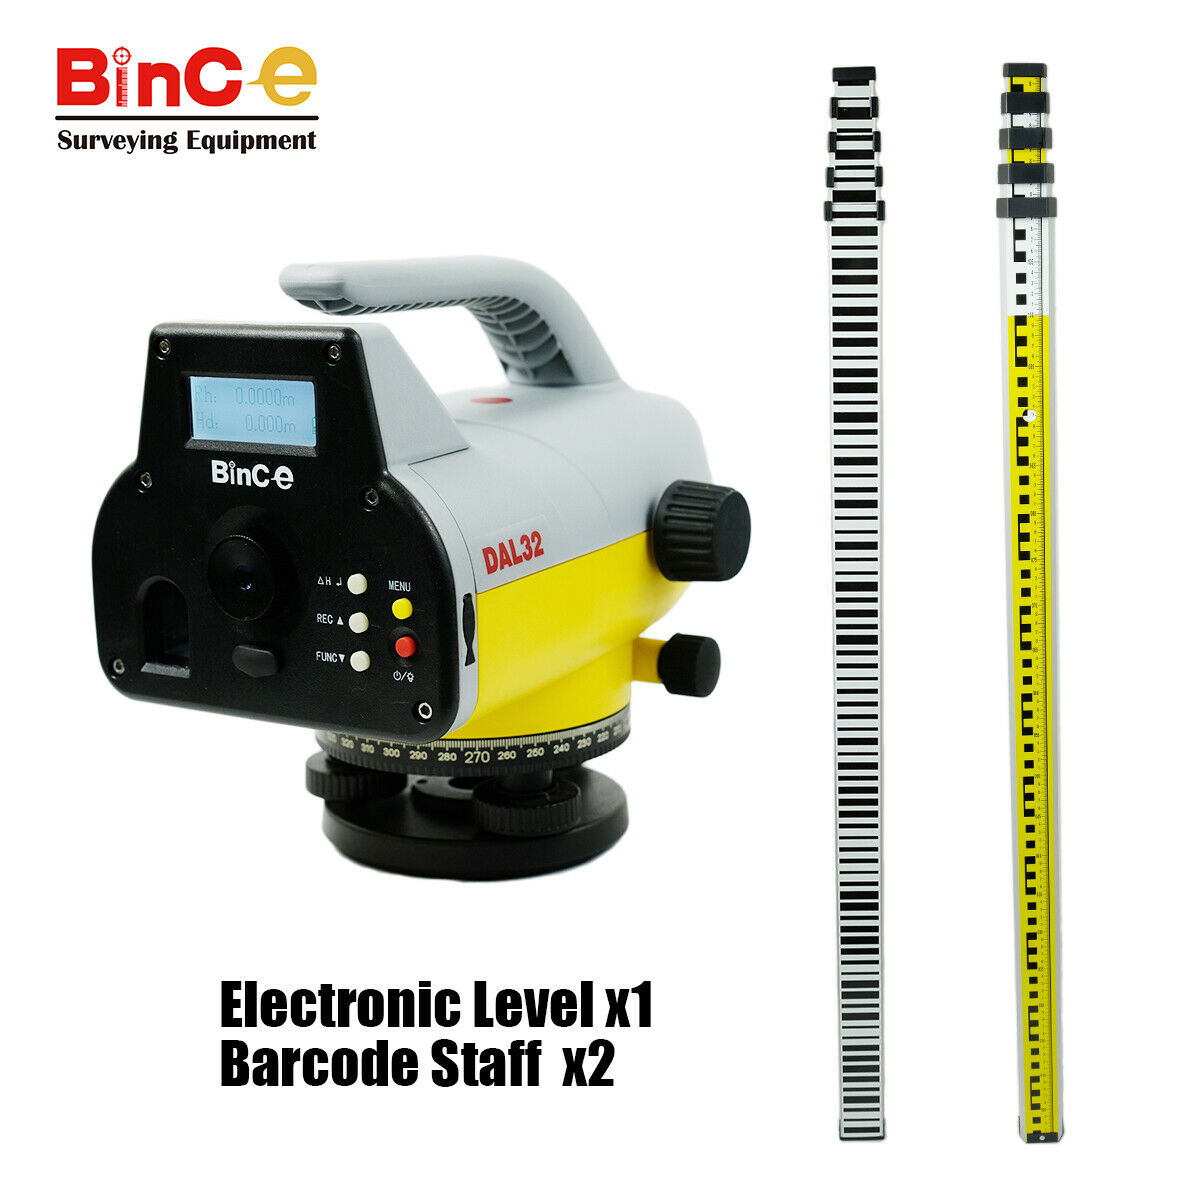 Bince DAL32 Digital Electronic Level with Memory with Two Leveling Barcode Staff